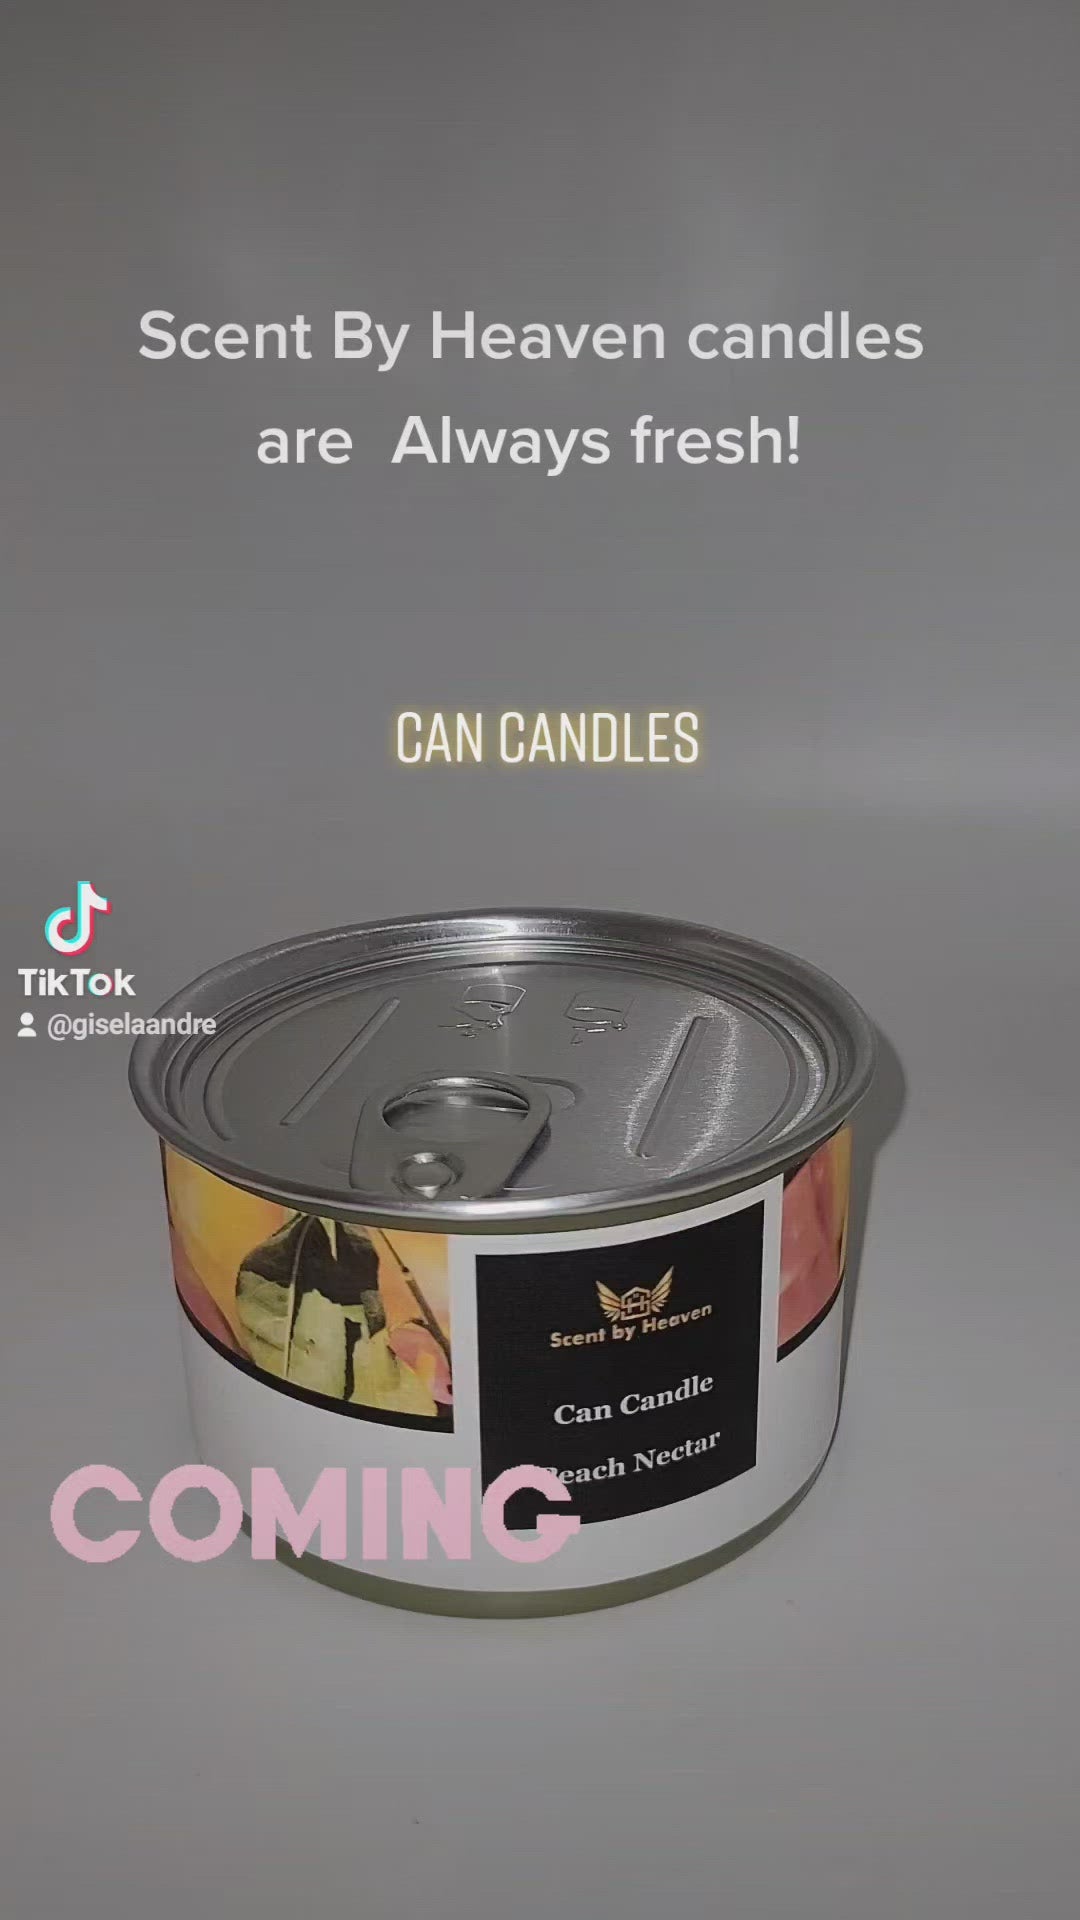 The Can Candle